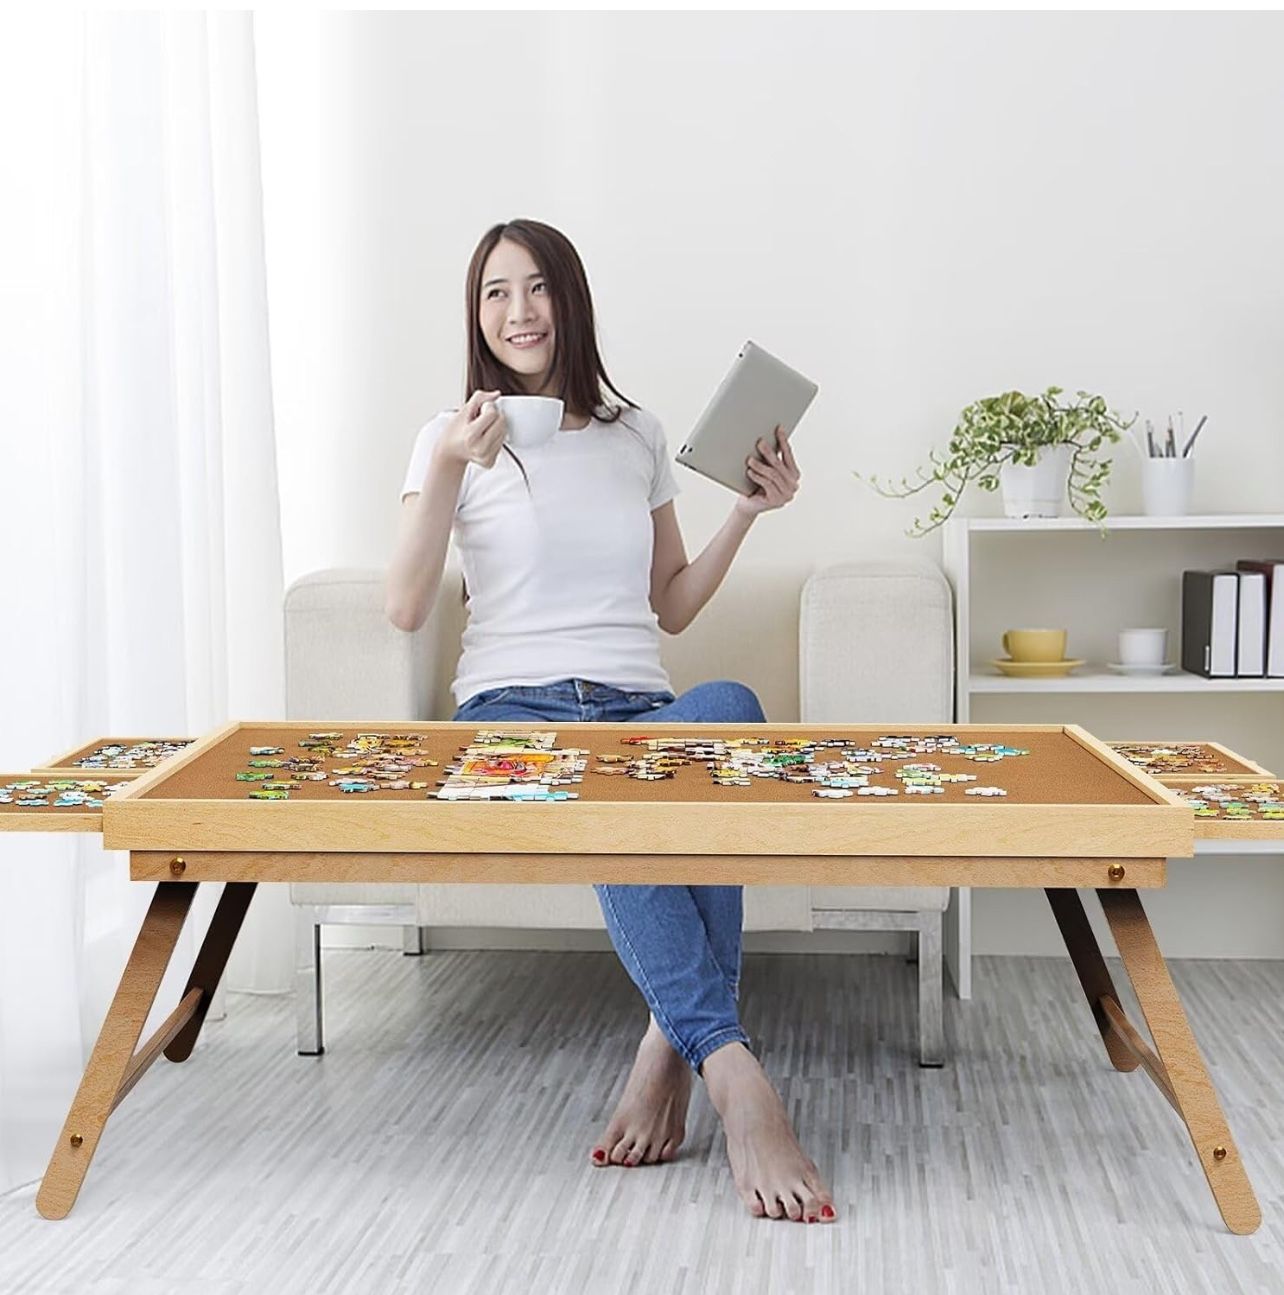 Puzzle Table 2000 Pieces,Jigsaw Puzzle Table with Drawers,41.3"x 29.5"Portable Puzzle Tables for Adults and Teens with Folding Legs